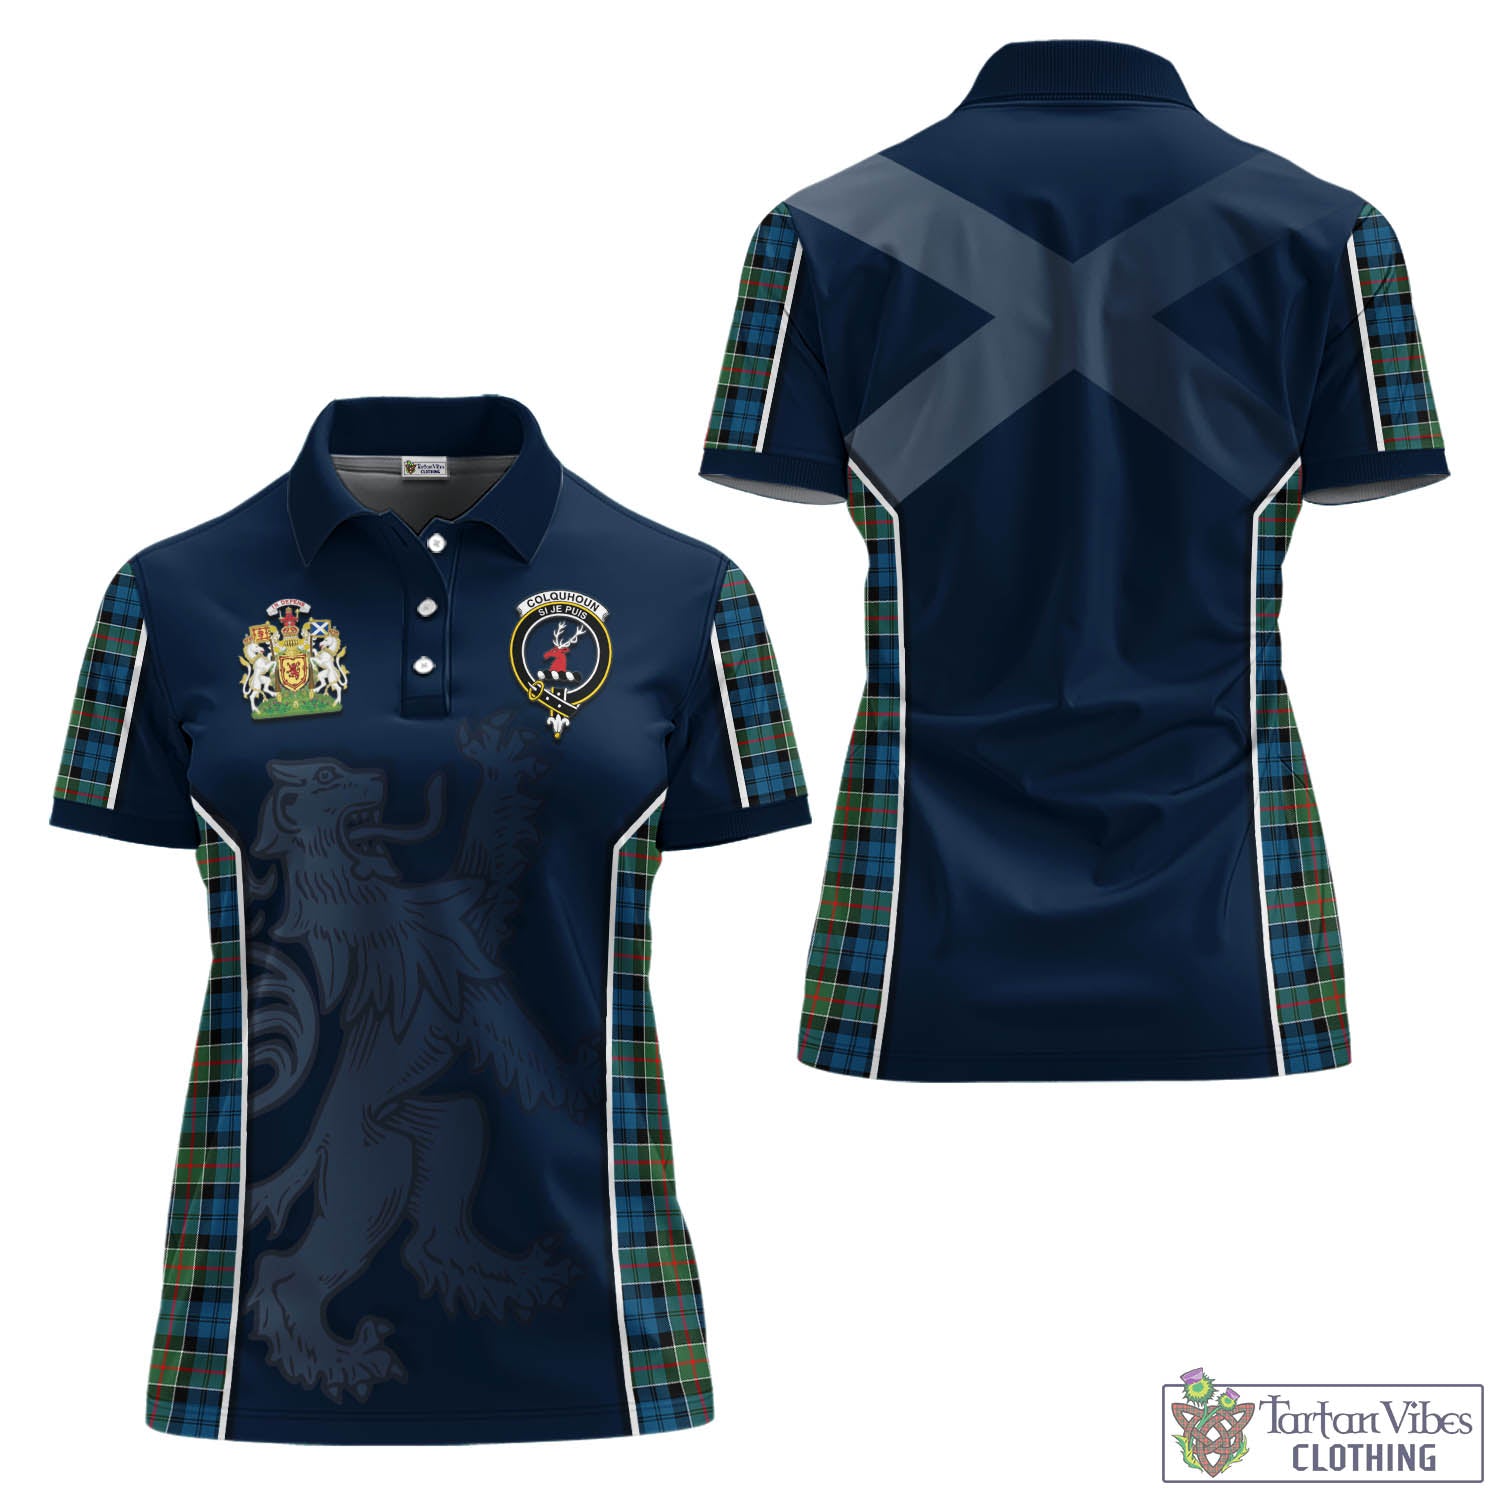 Tartan Vibes Clothing Colquhoun Ancient Tartan Women's Polo Shirt with Family Crest and Lion Rampant Vibes Sport Style